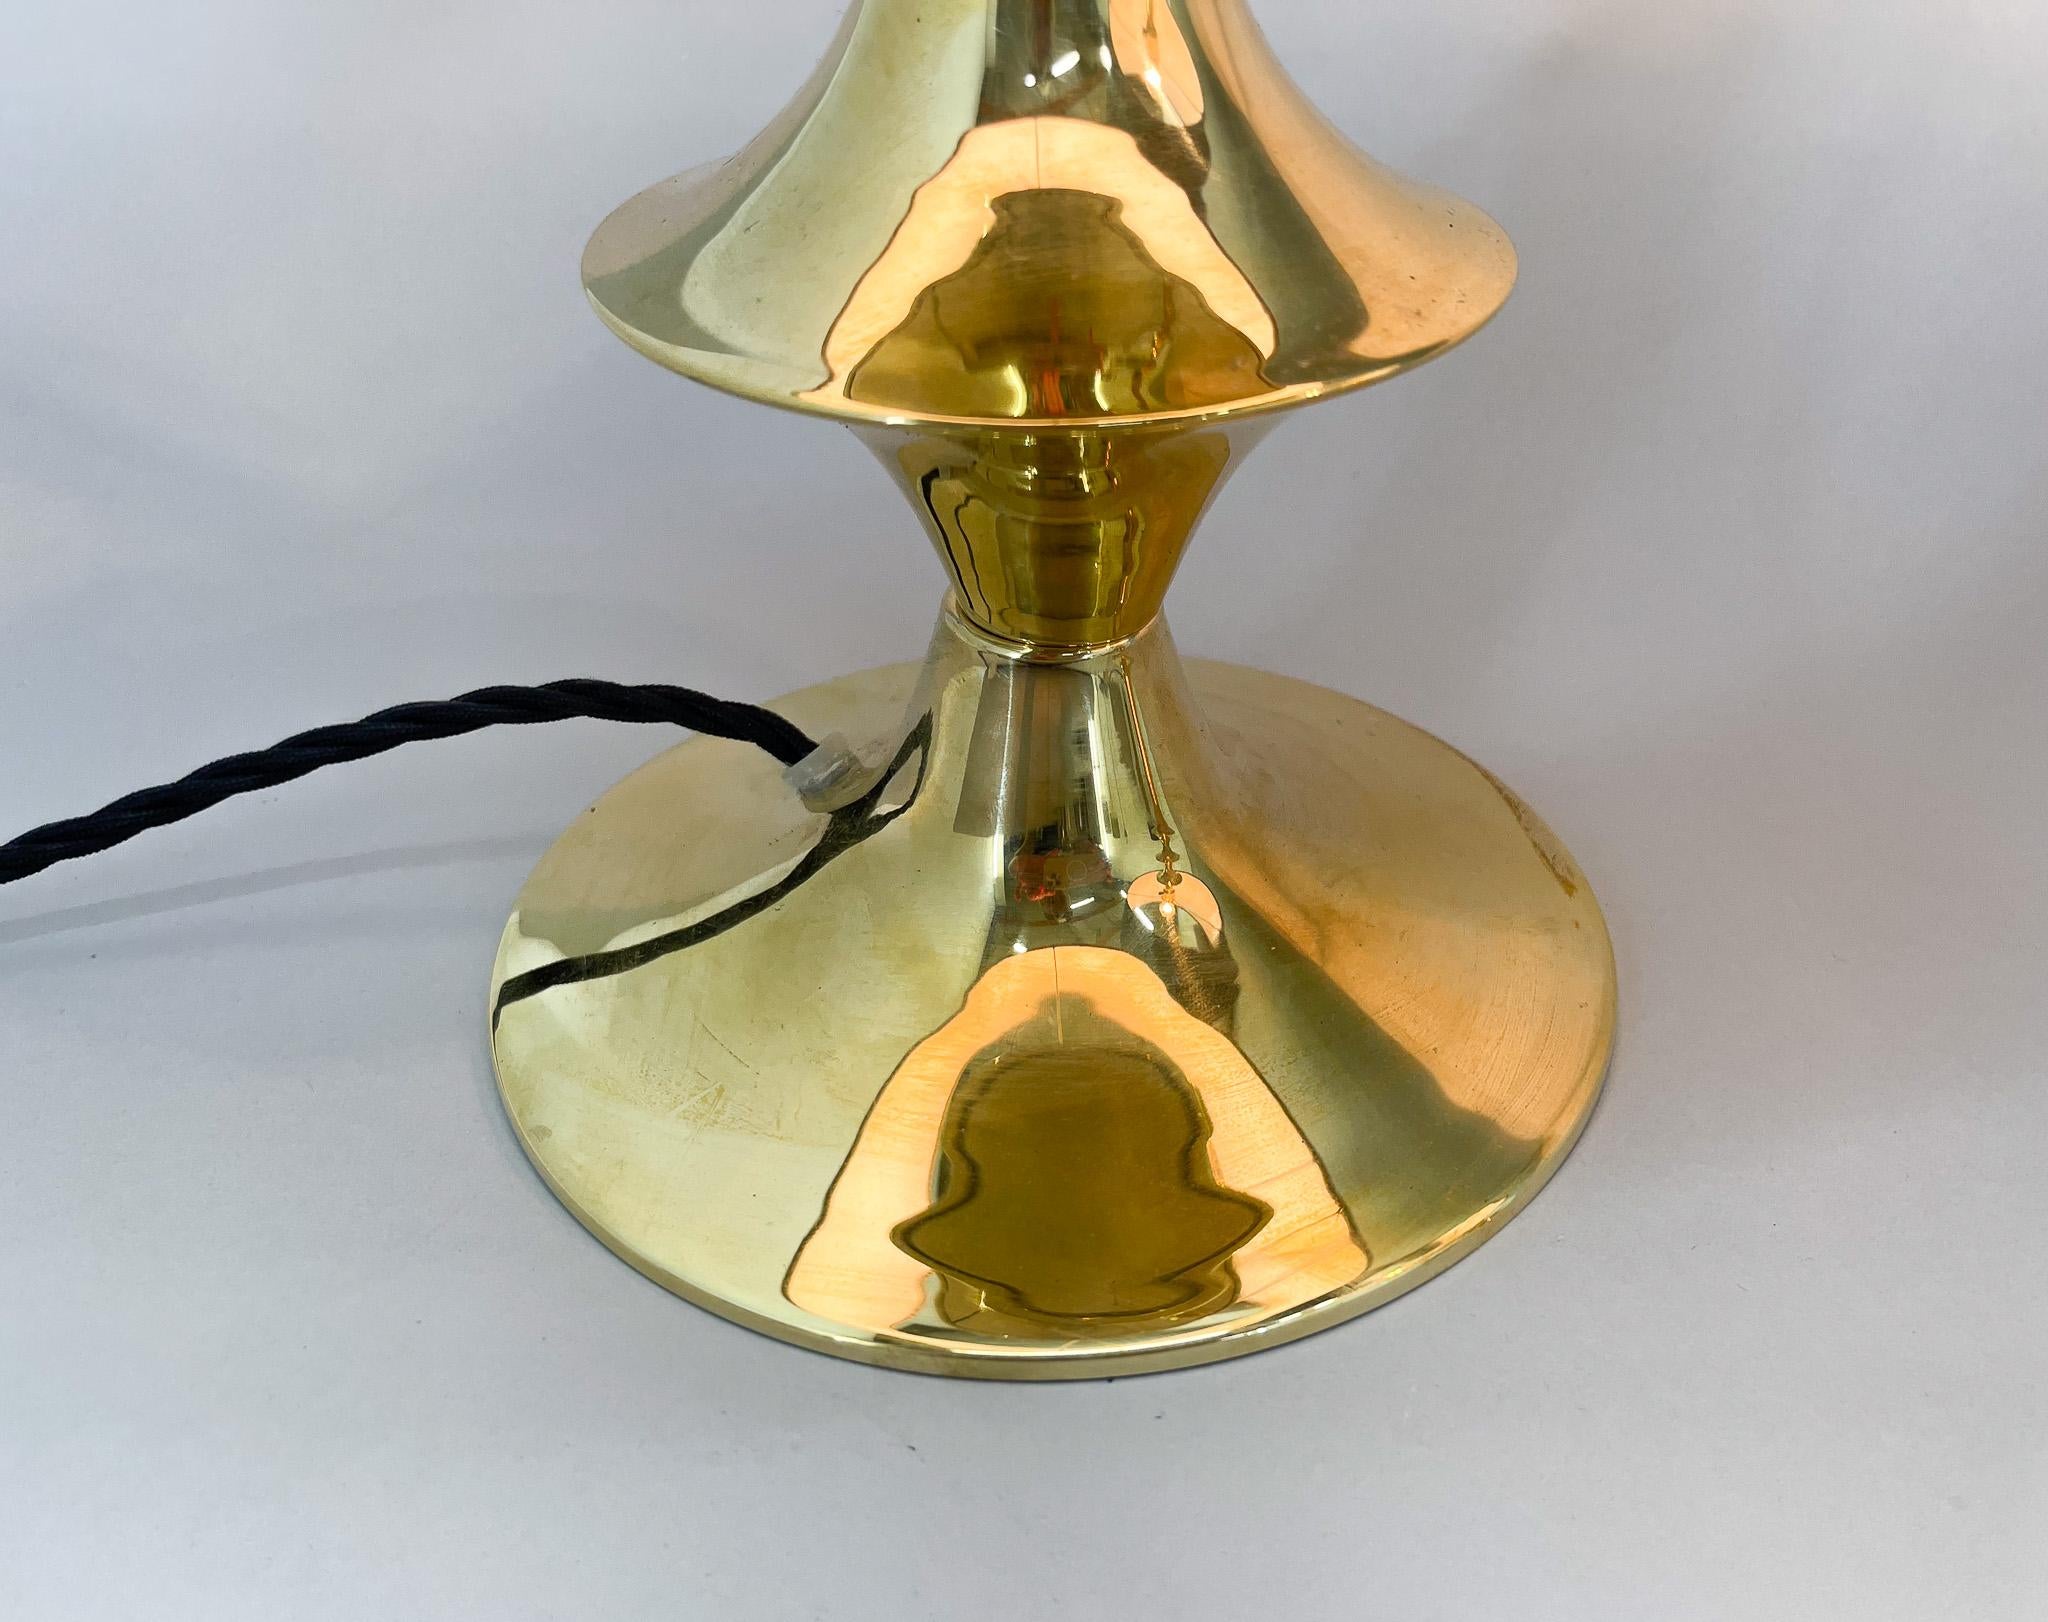 Czech Pair of Mid-Century Brass Table Lamps, 1950s, Restored